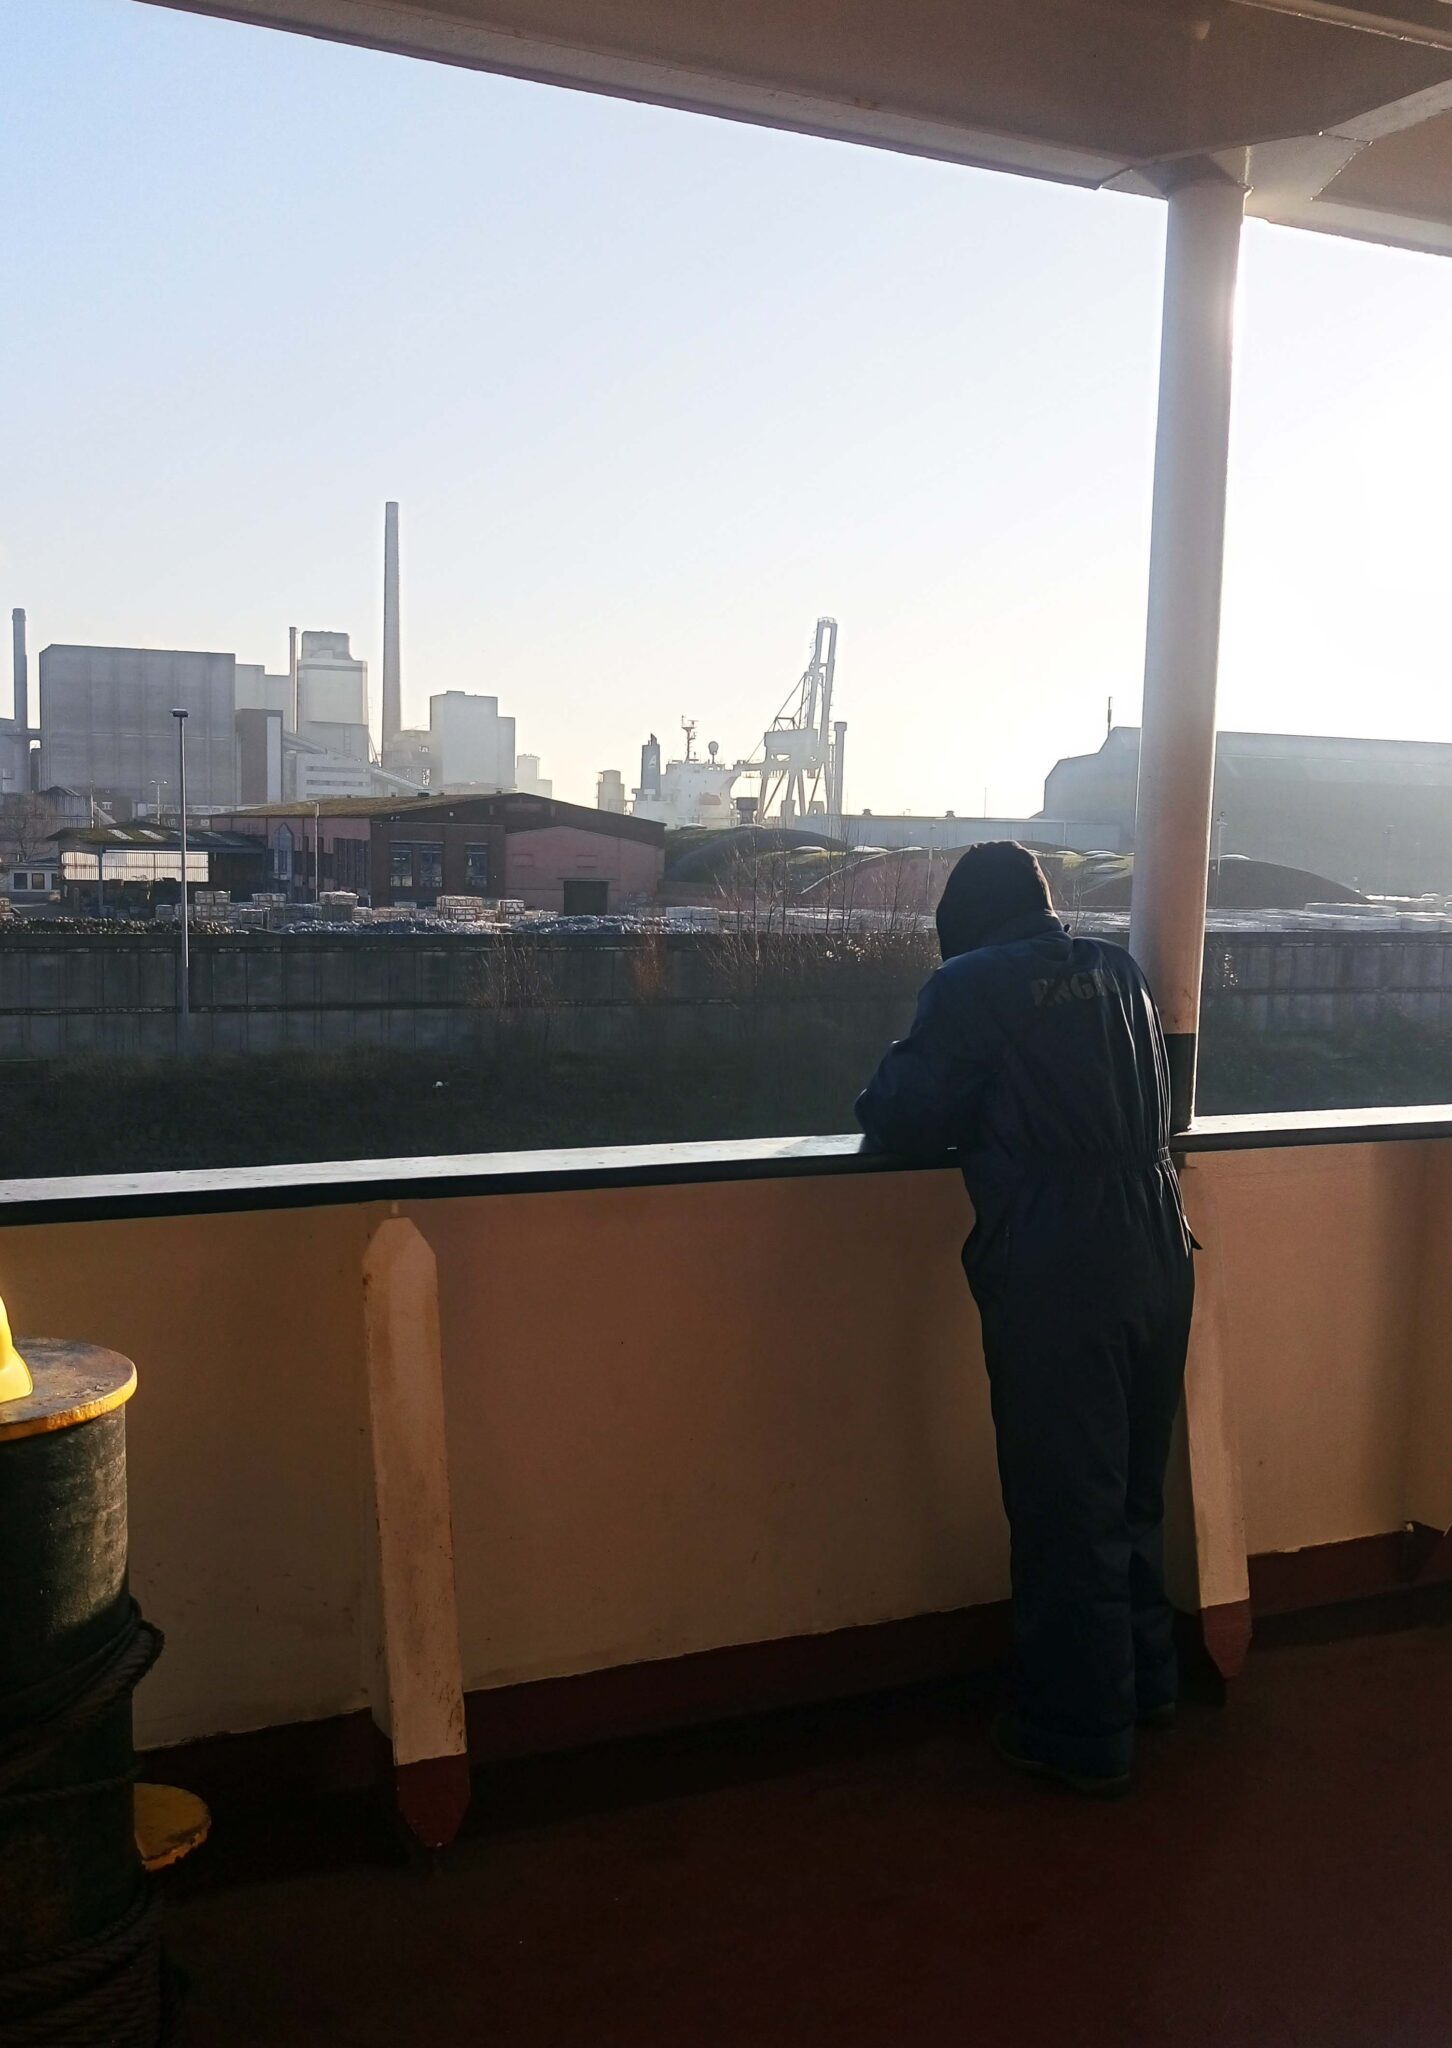 Seafarer in the ship's side watching the waters.